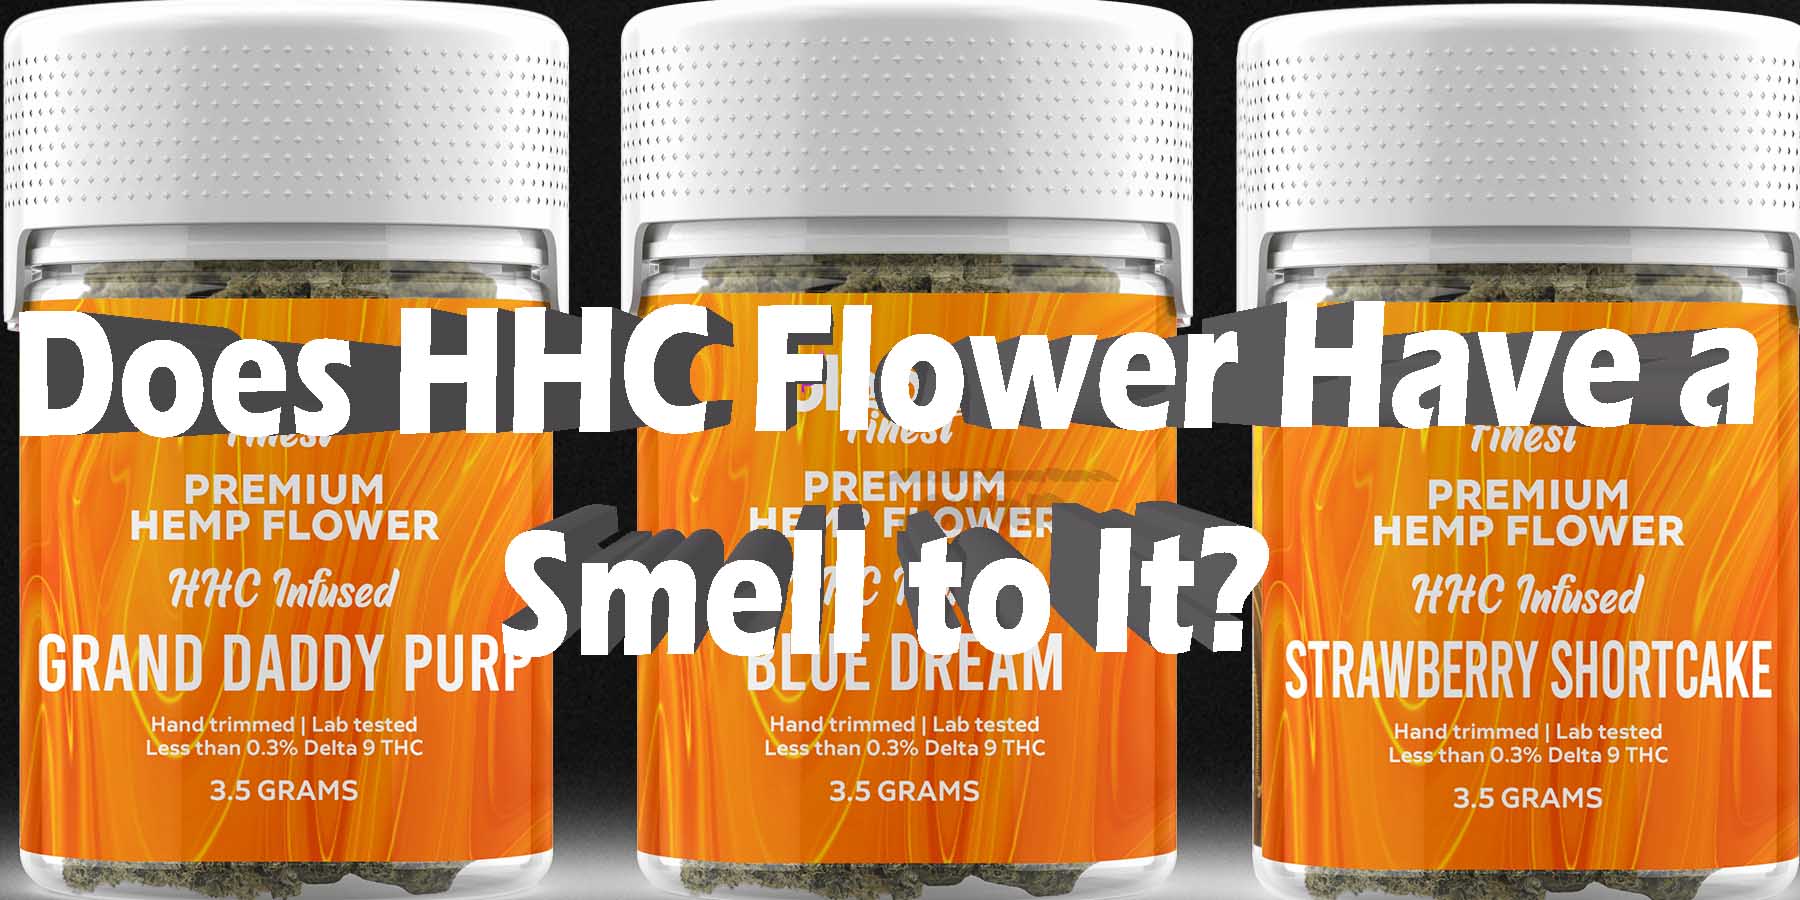 Does HHC Flower Have a Smell to It HowToGetNearMe BestPlace LowestPrice Coupon Discount For Smoking High Smoke Shop Online near Me-Strongest Binoid.